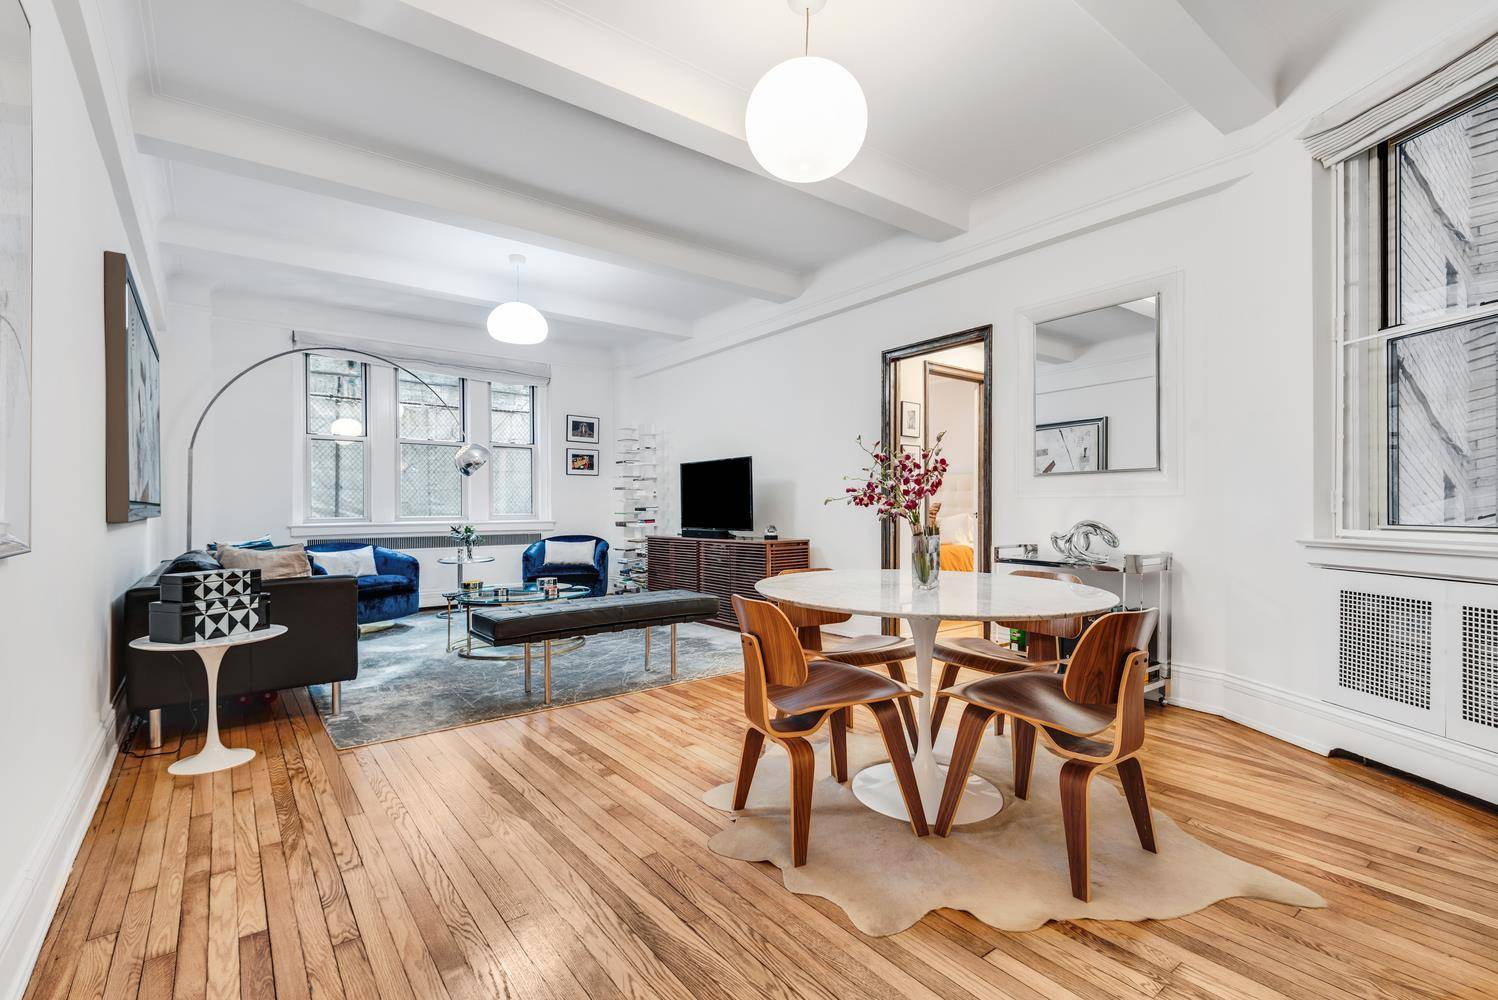 Enjoy meticulously designed living space along with your OWN COVETED KEY TO GRAMERCY PARK.